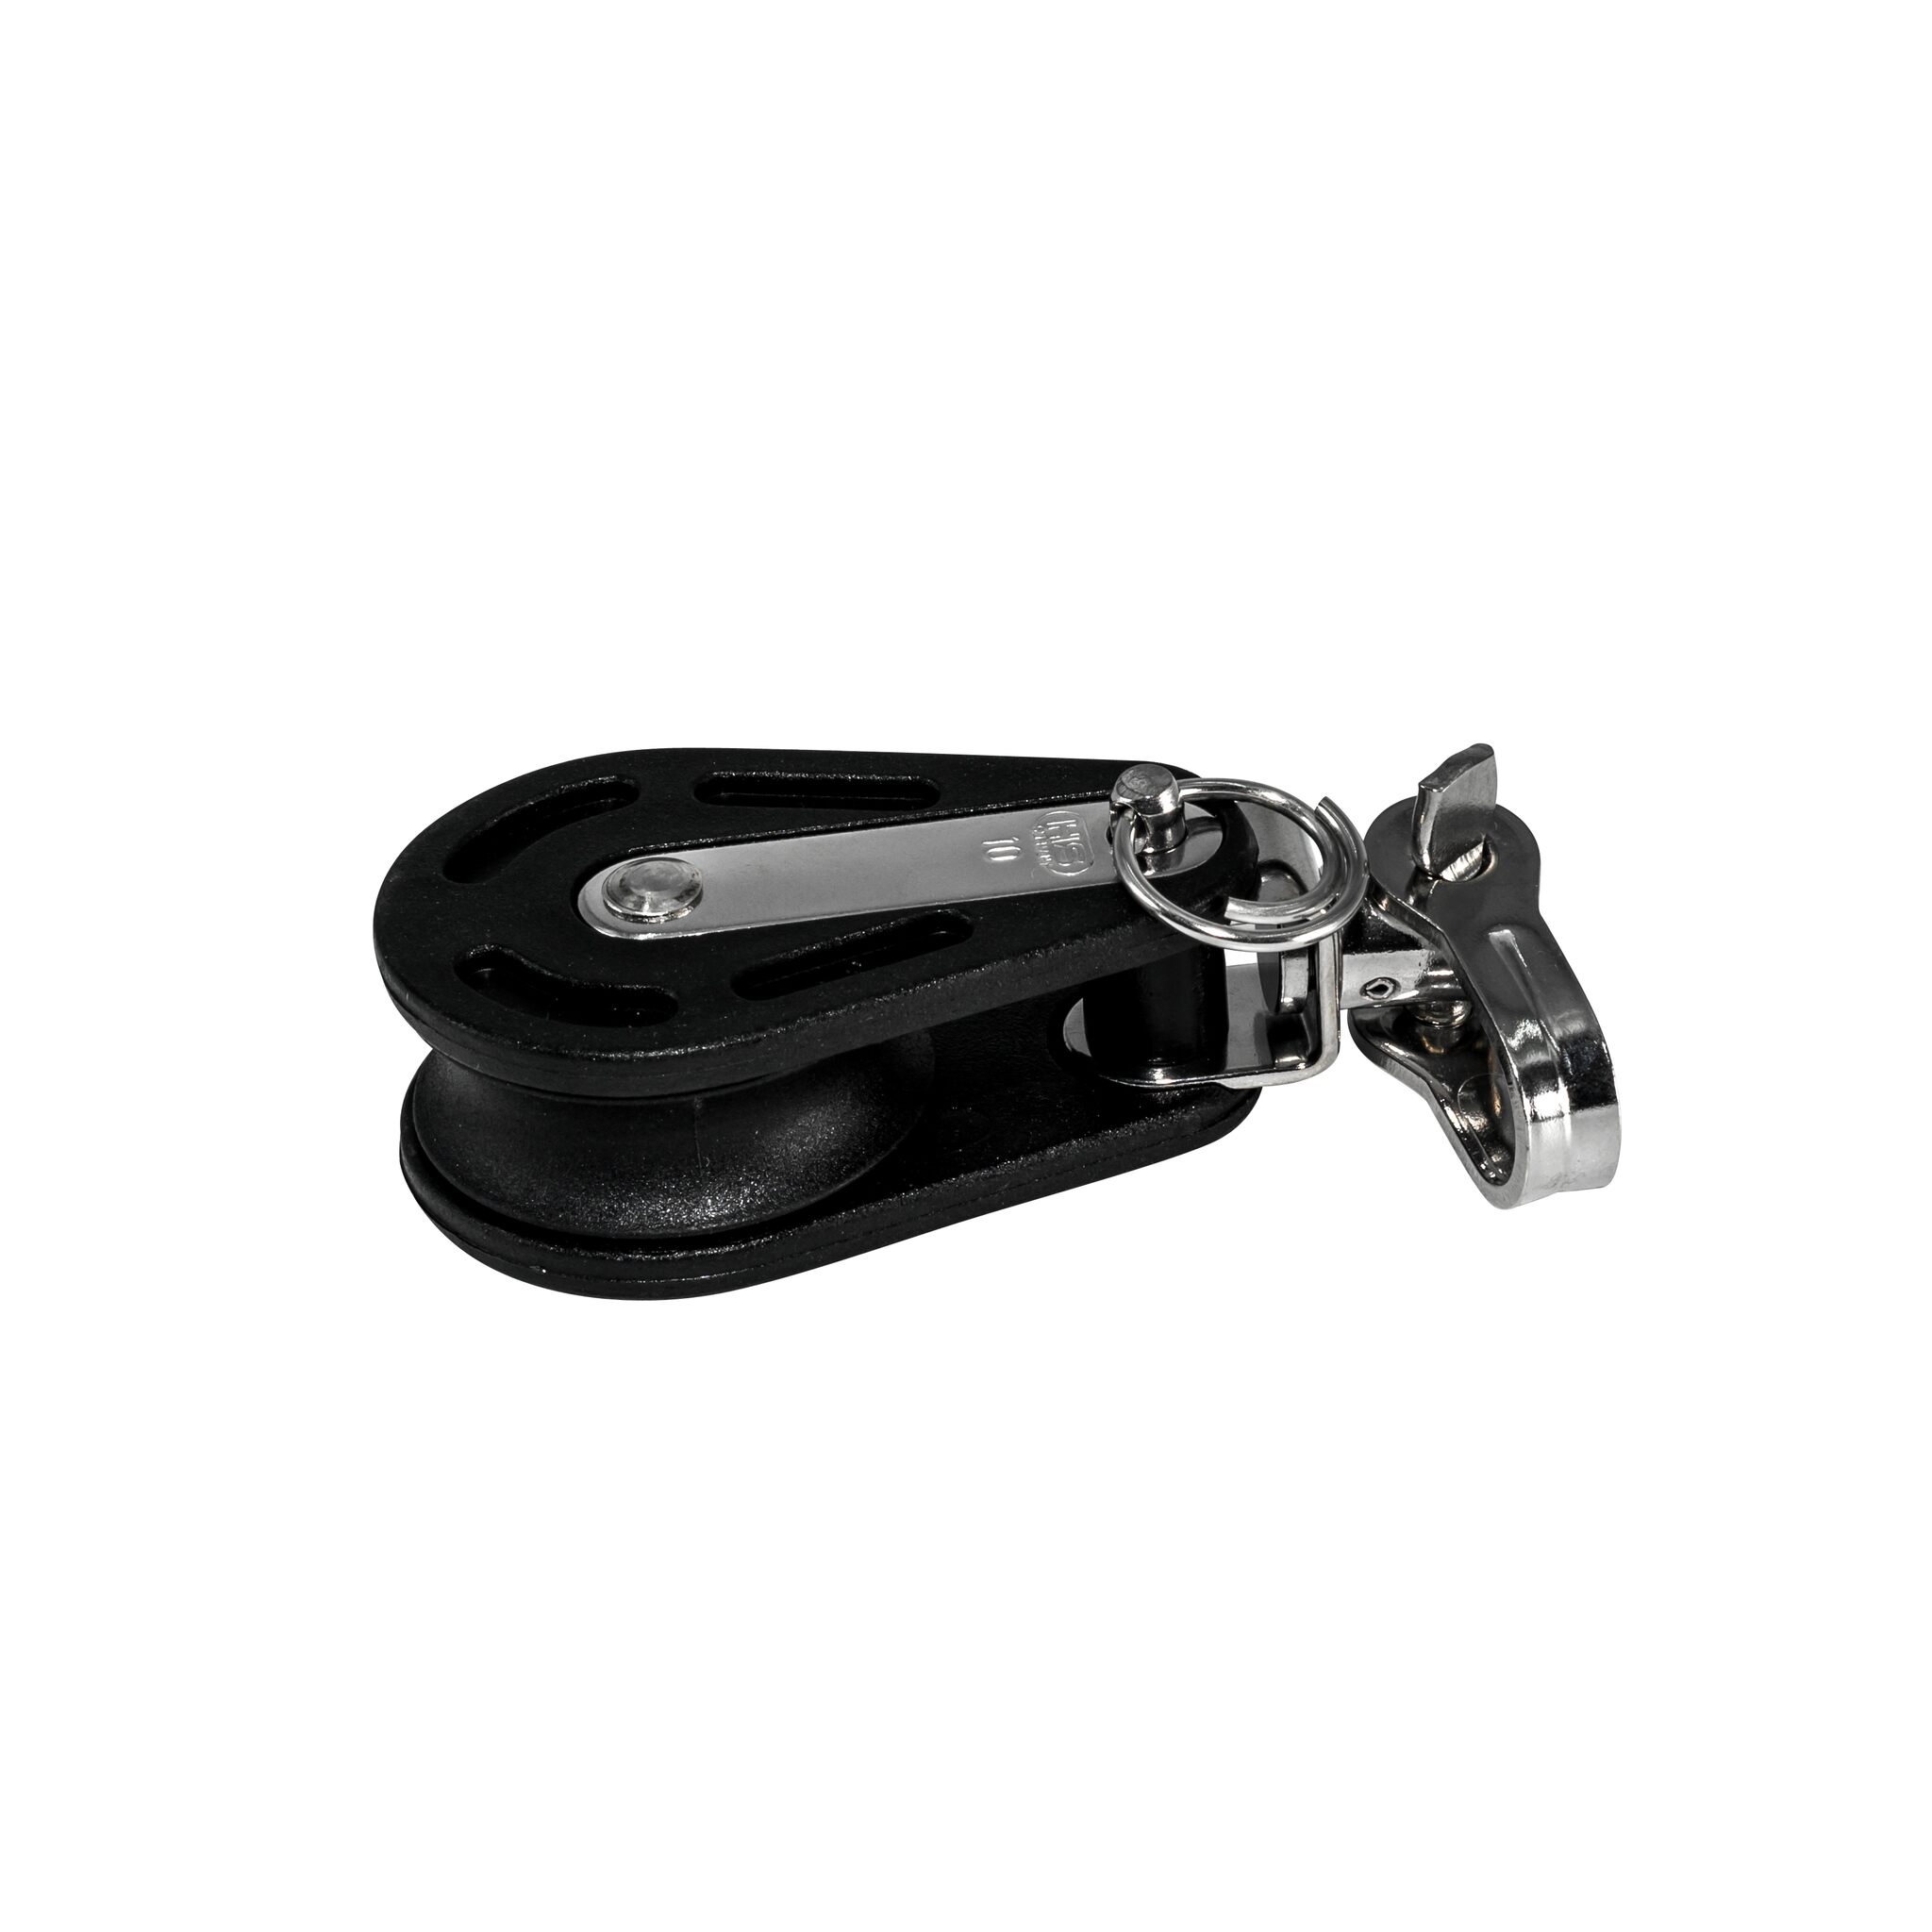 Clamcleat rope clamps open side, small